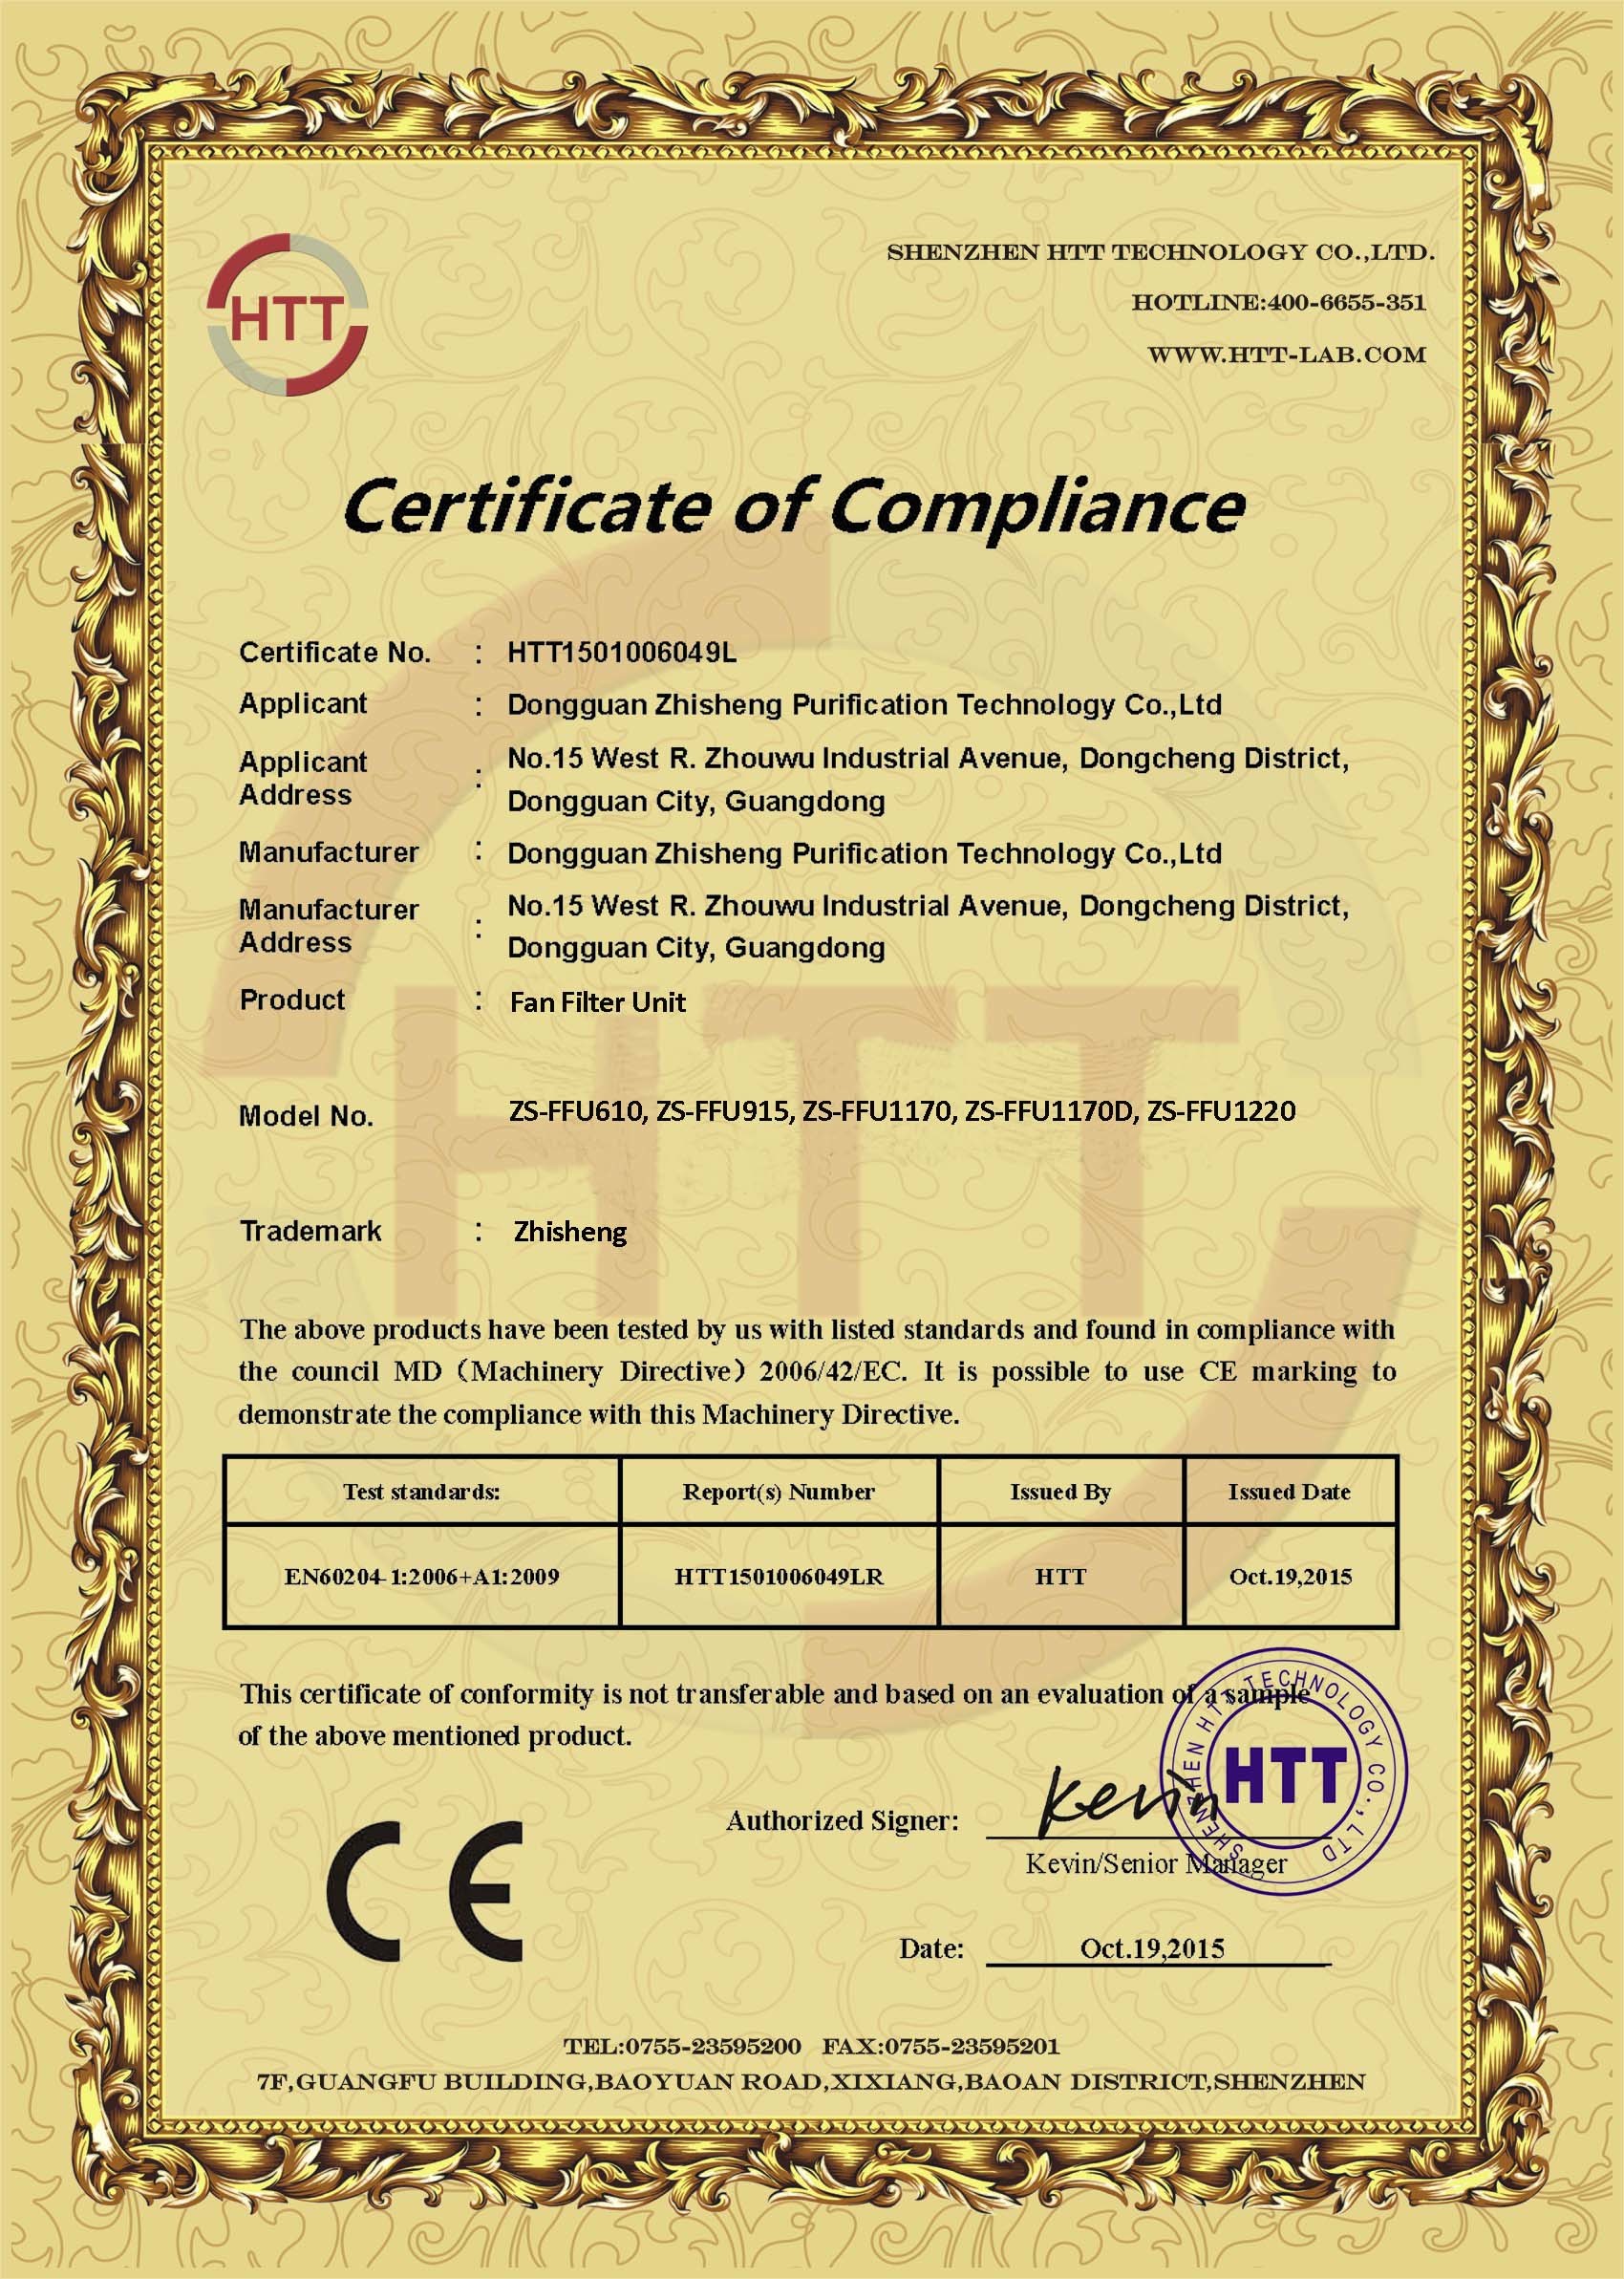 Zhisheng Purification Technology Co., Limited Certifications